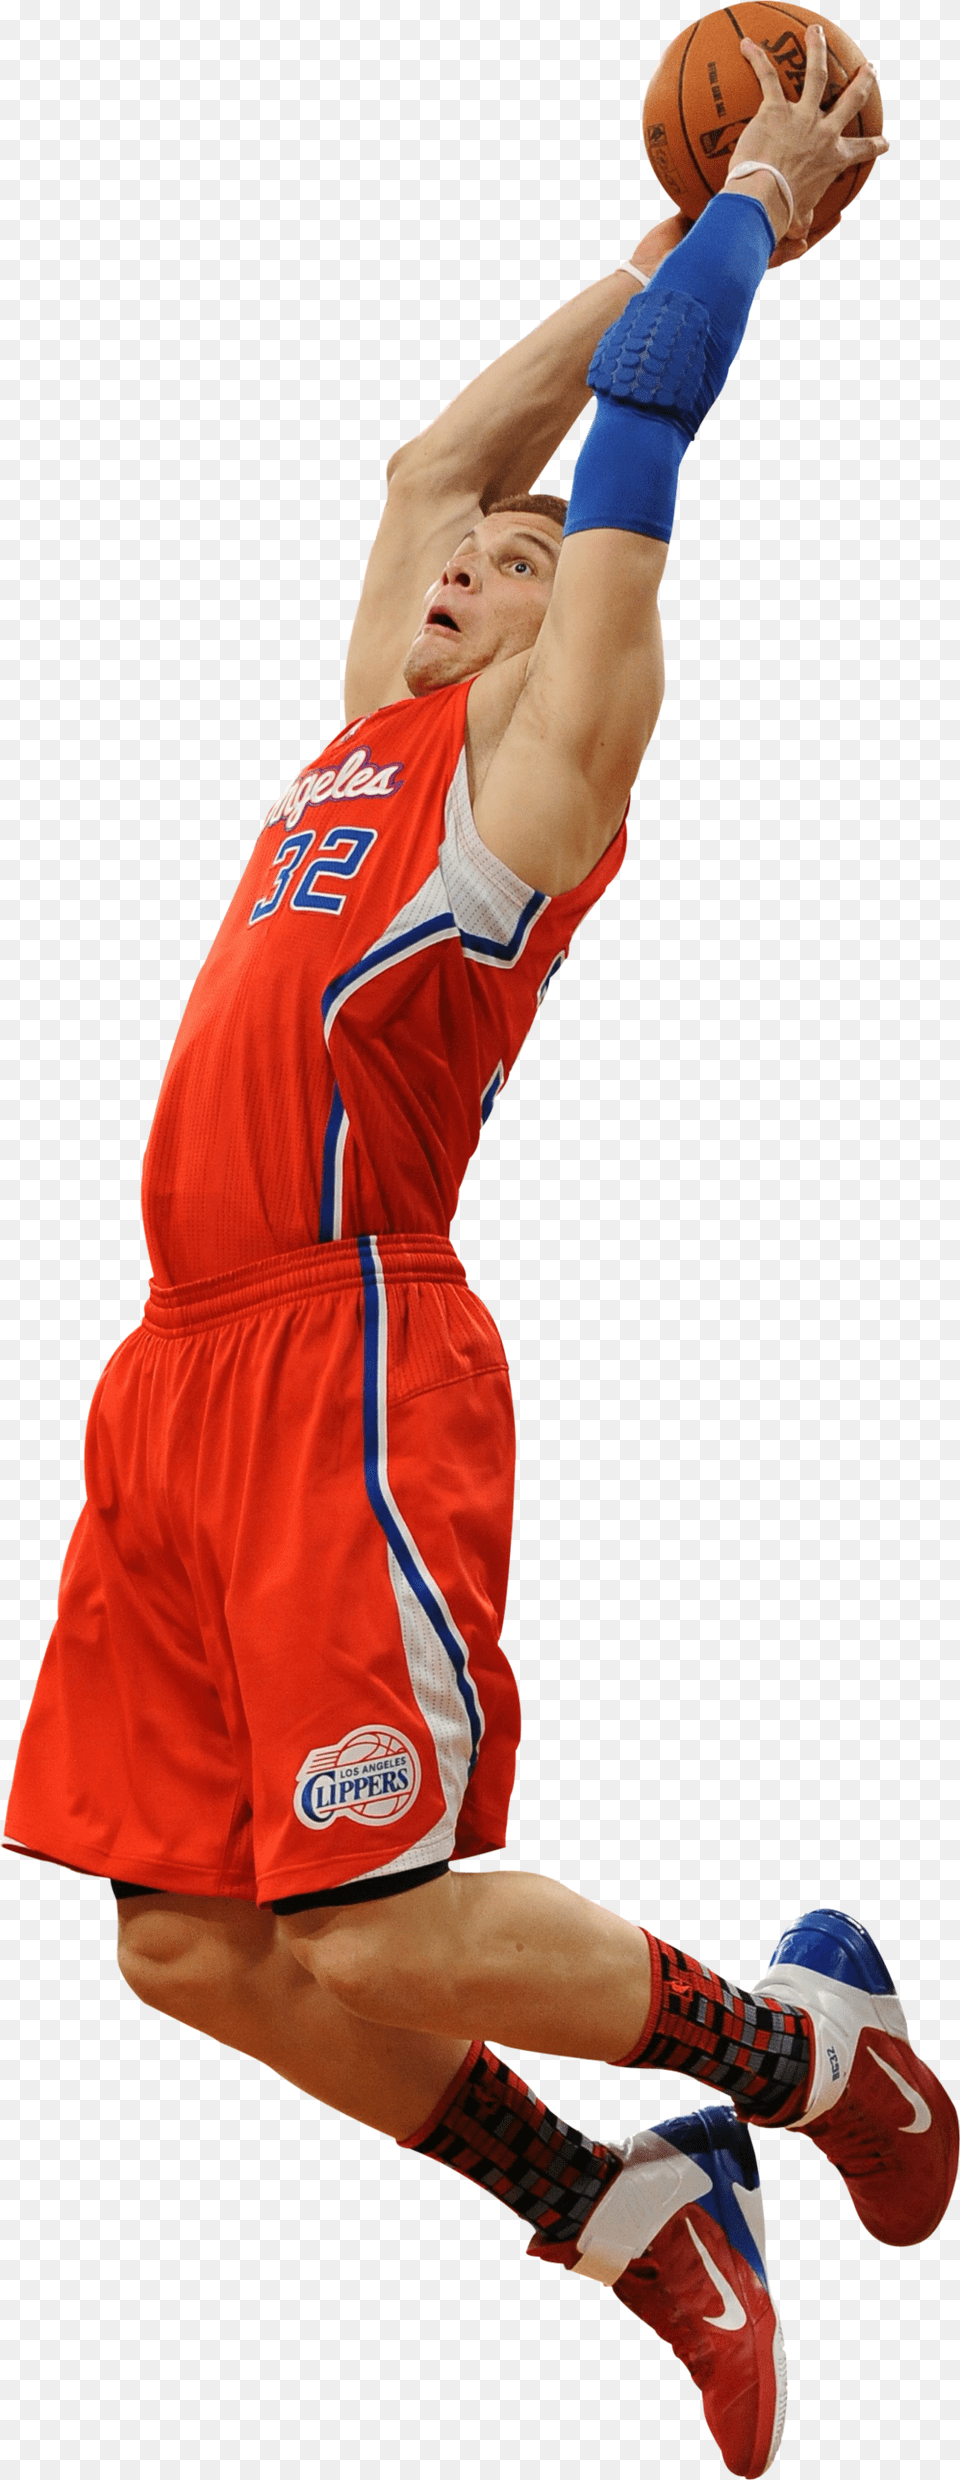 Blake Griffin Dunk Download Transparent Blake Griffin, Ball, Person, Sport, Basketball (ball) Free Png